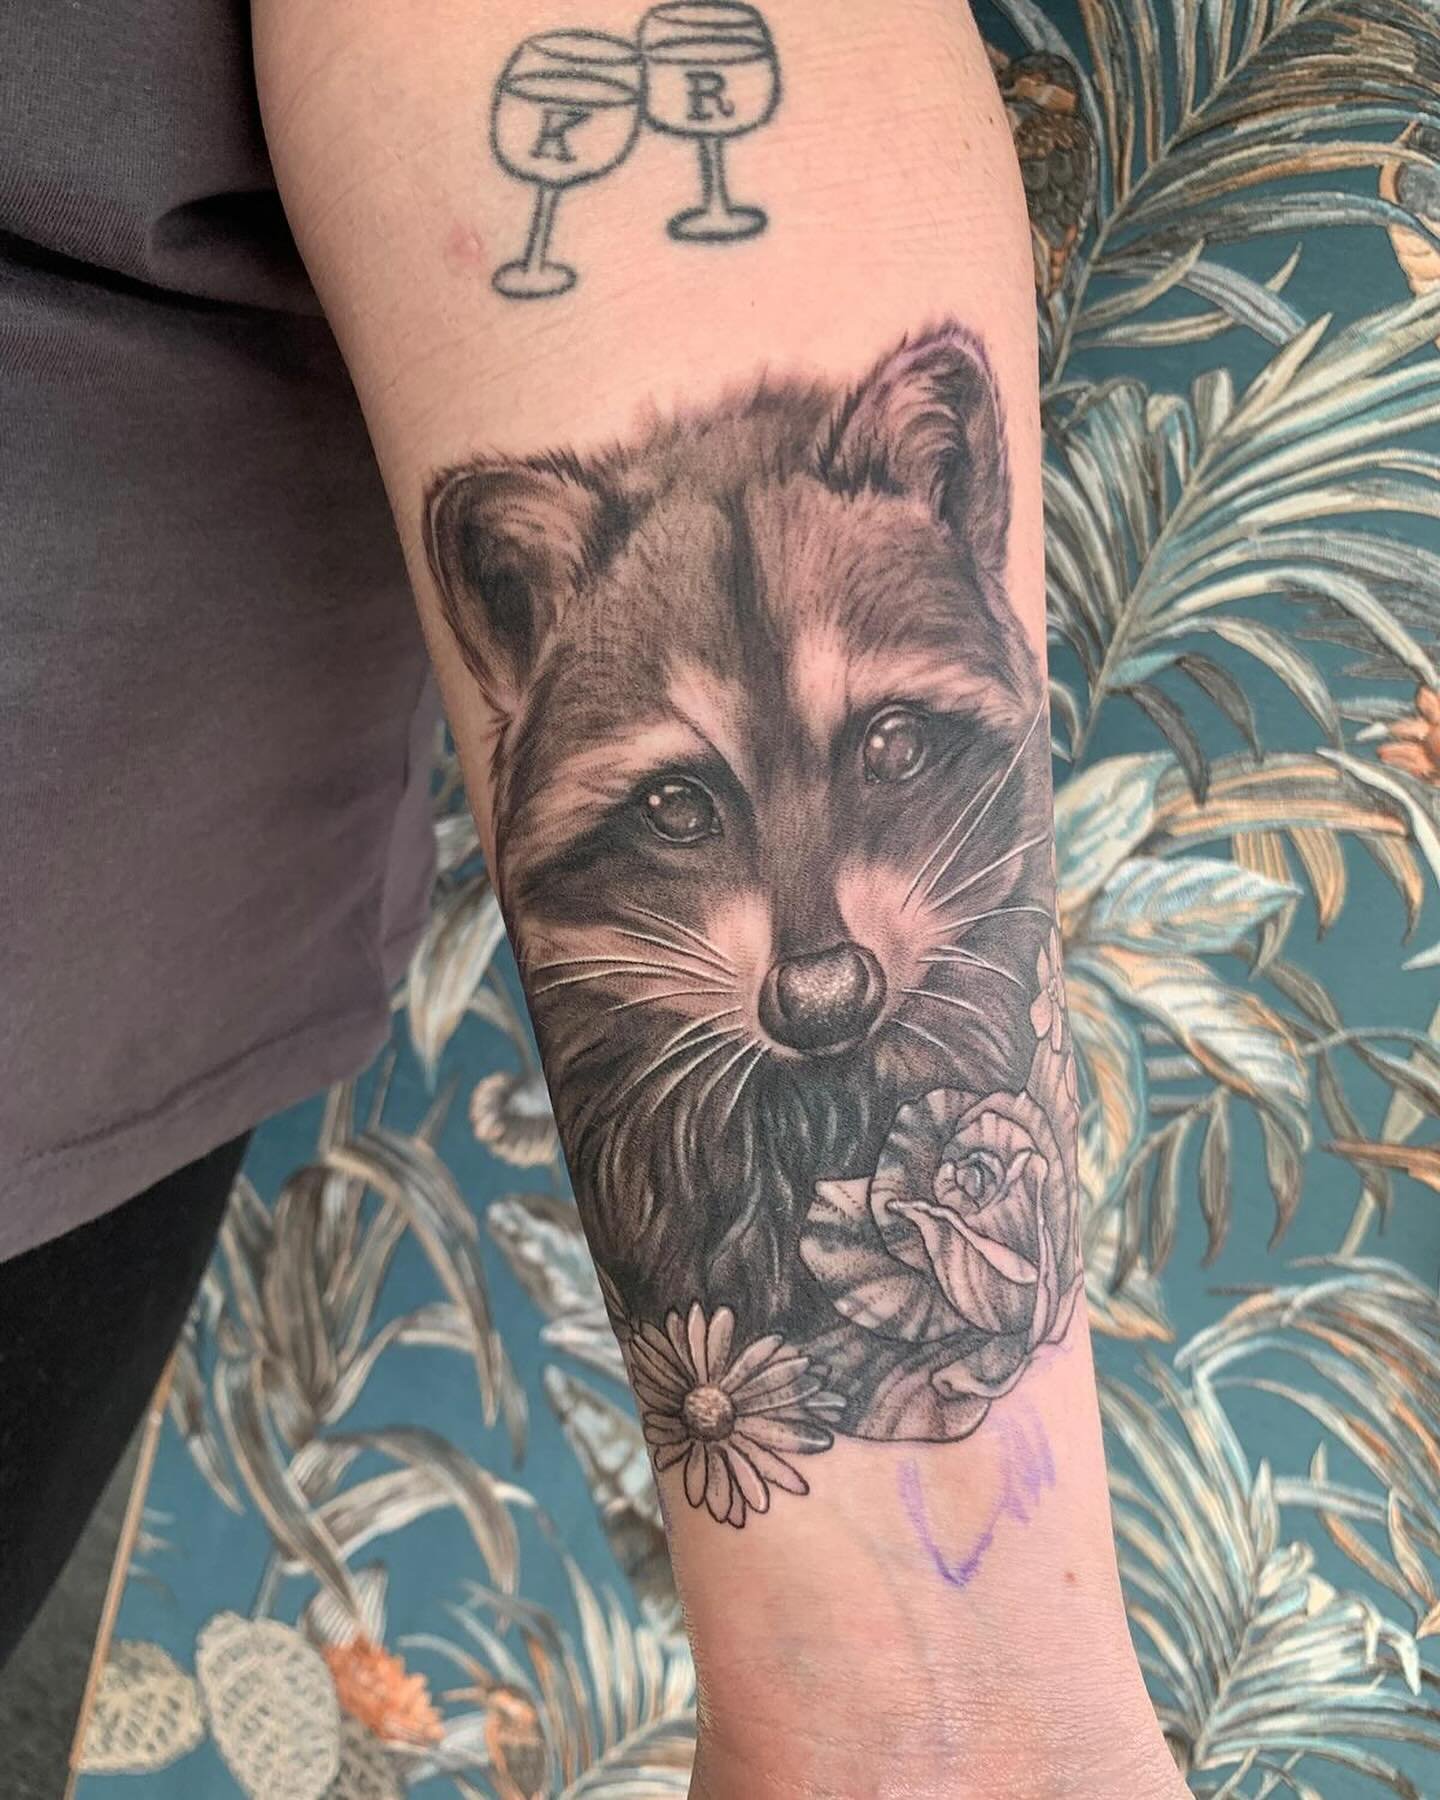 @charlieleightattoostuff beautiful raccoon piece done by Charlie. Get in touch to book your next tattoo with her!

Made with @biotat_ 

#blackandgreytattoo #blackandgrey #blackandgreyrealism #realismtattoo #racoontattoo #femaletattooartist #tattooart